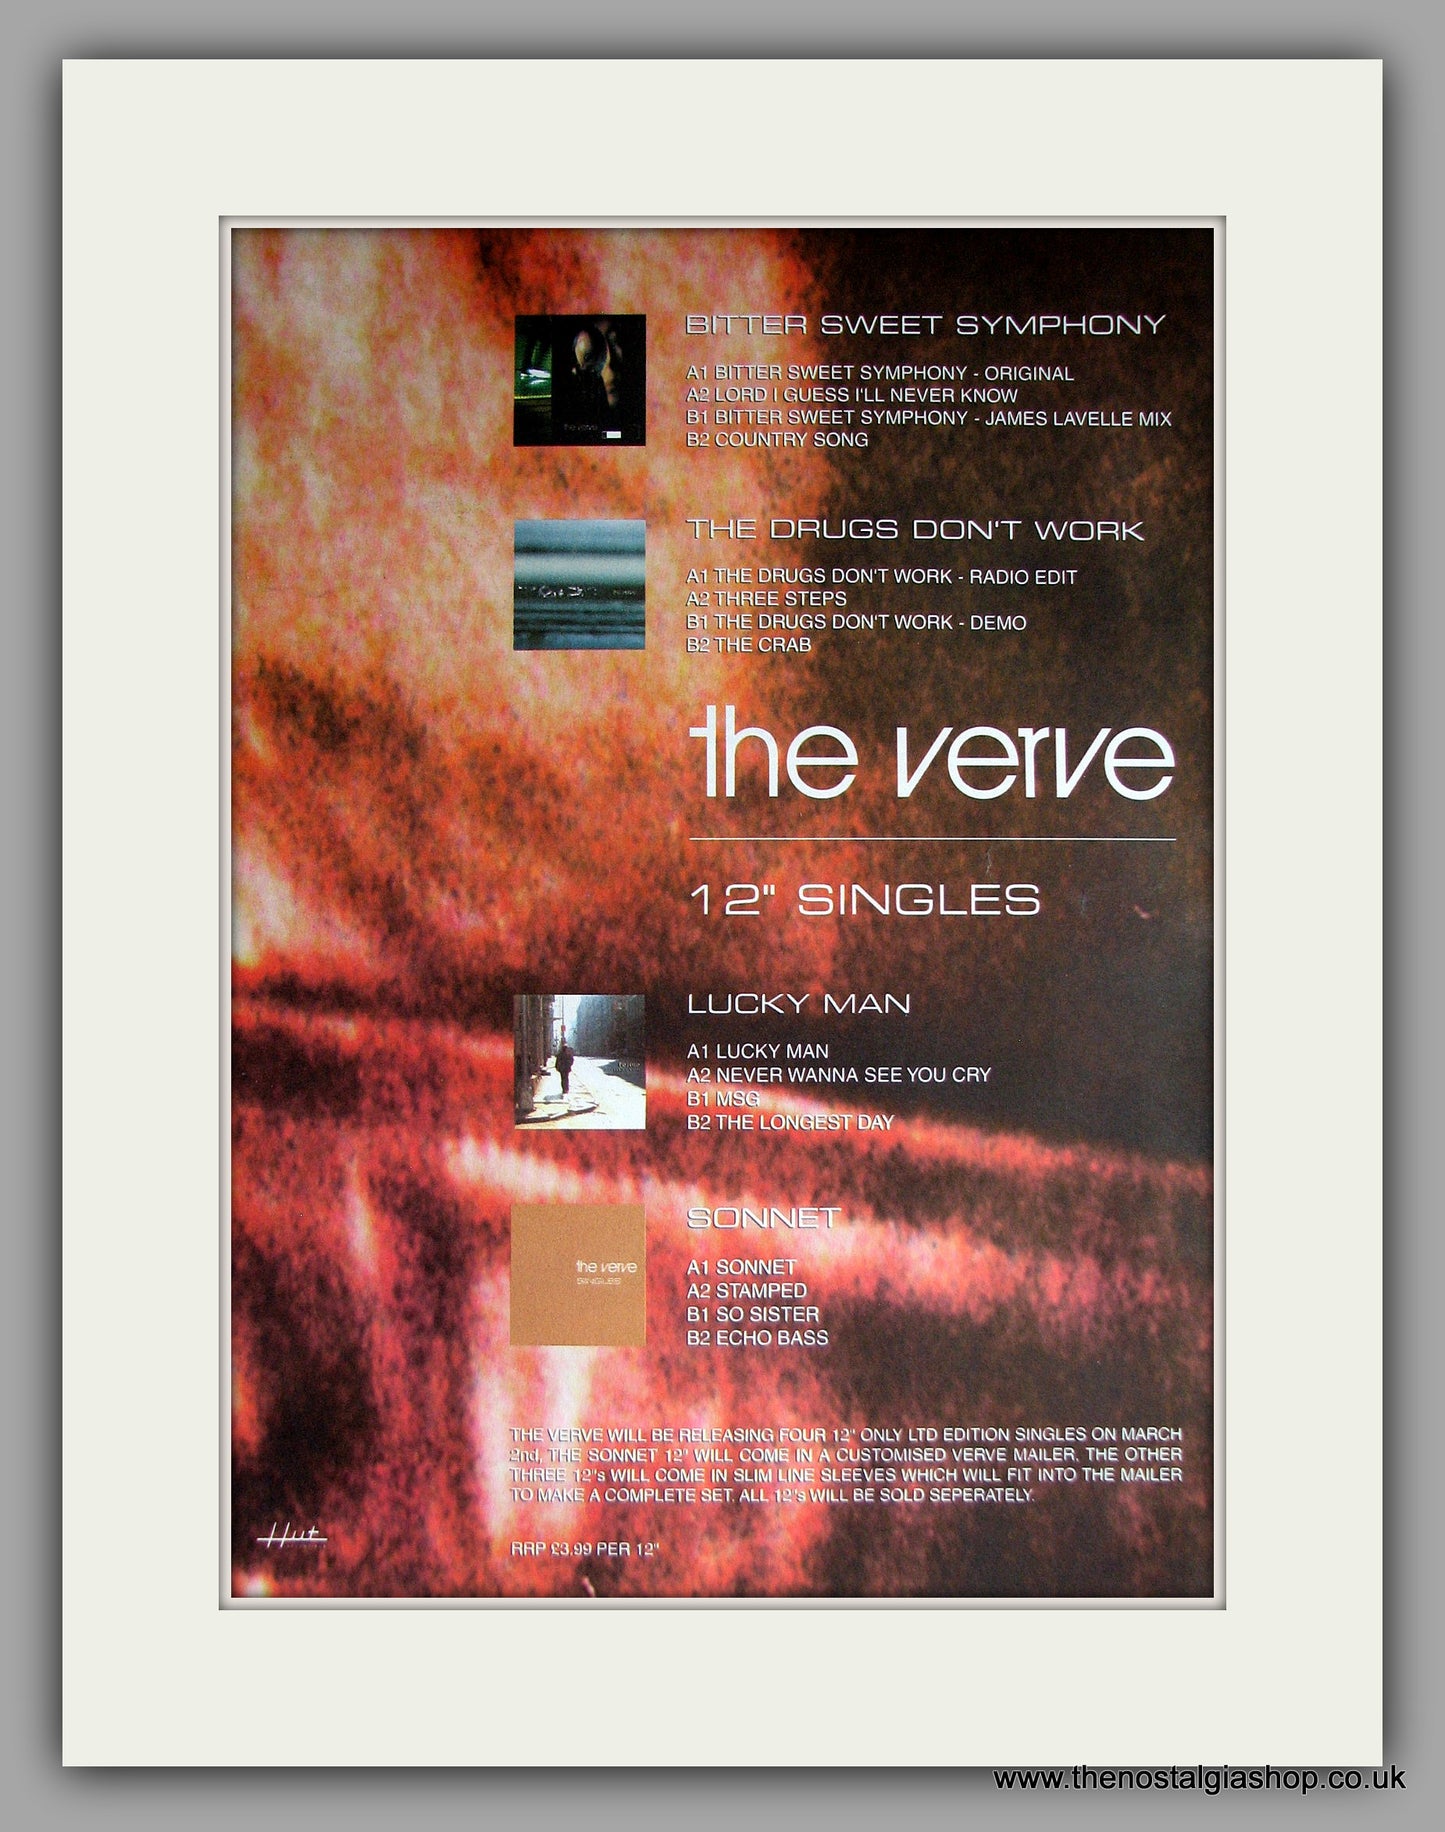 Verve (The) - Bitter Sweet Symphony, The Drugs Don't Work, Lucky Man, Sonnet. Original Vintage Advert 1998  (ref AD11164)